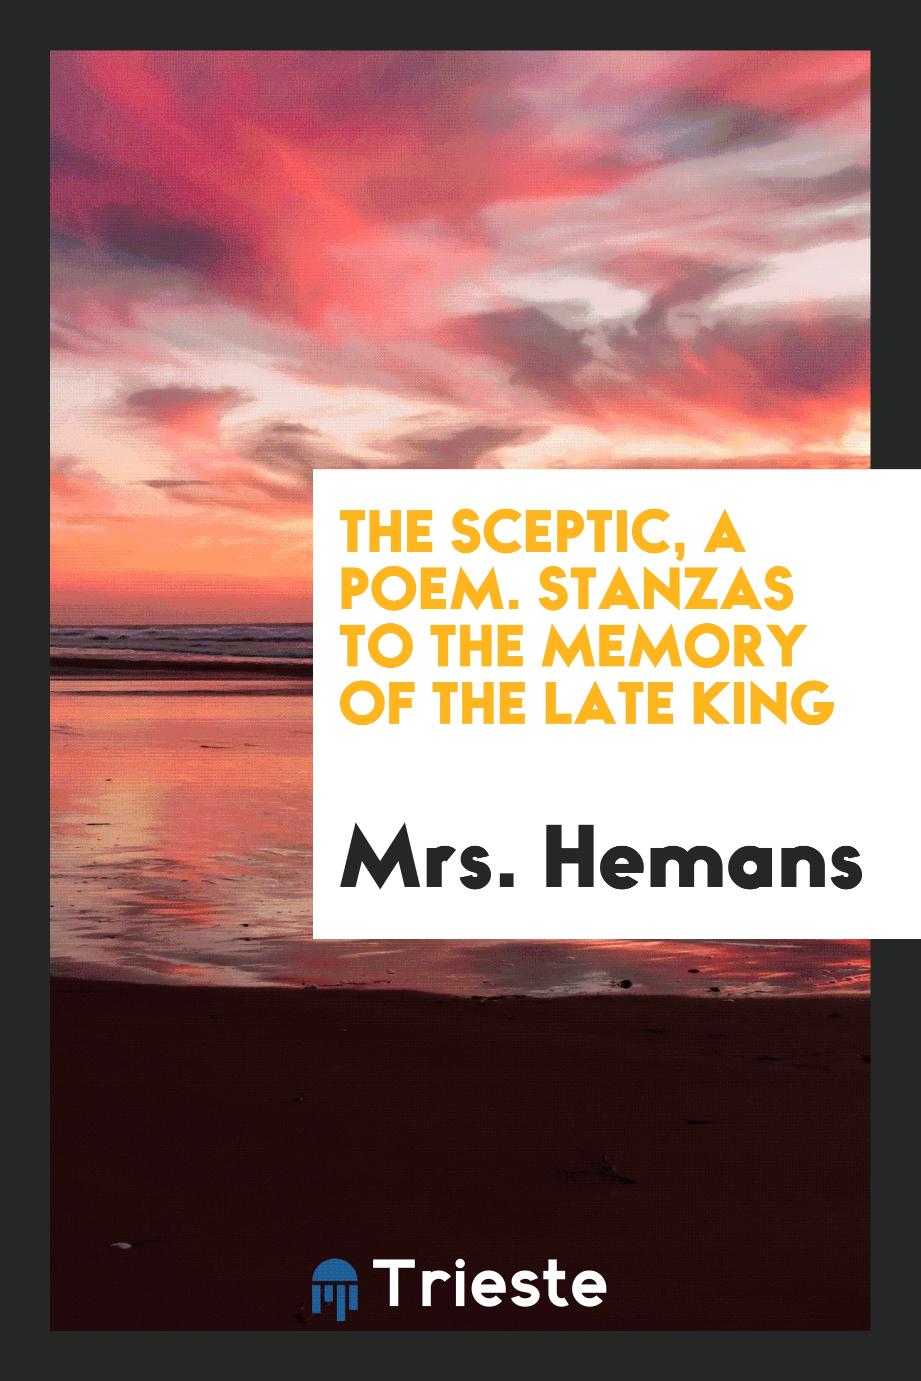 The Sceptic, a Poem. Stanzas to the Memory of the Late King